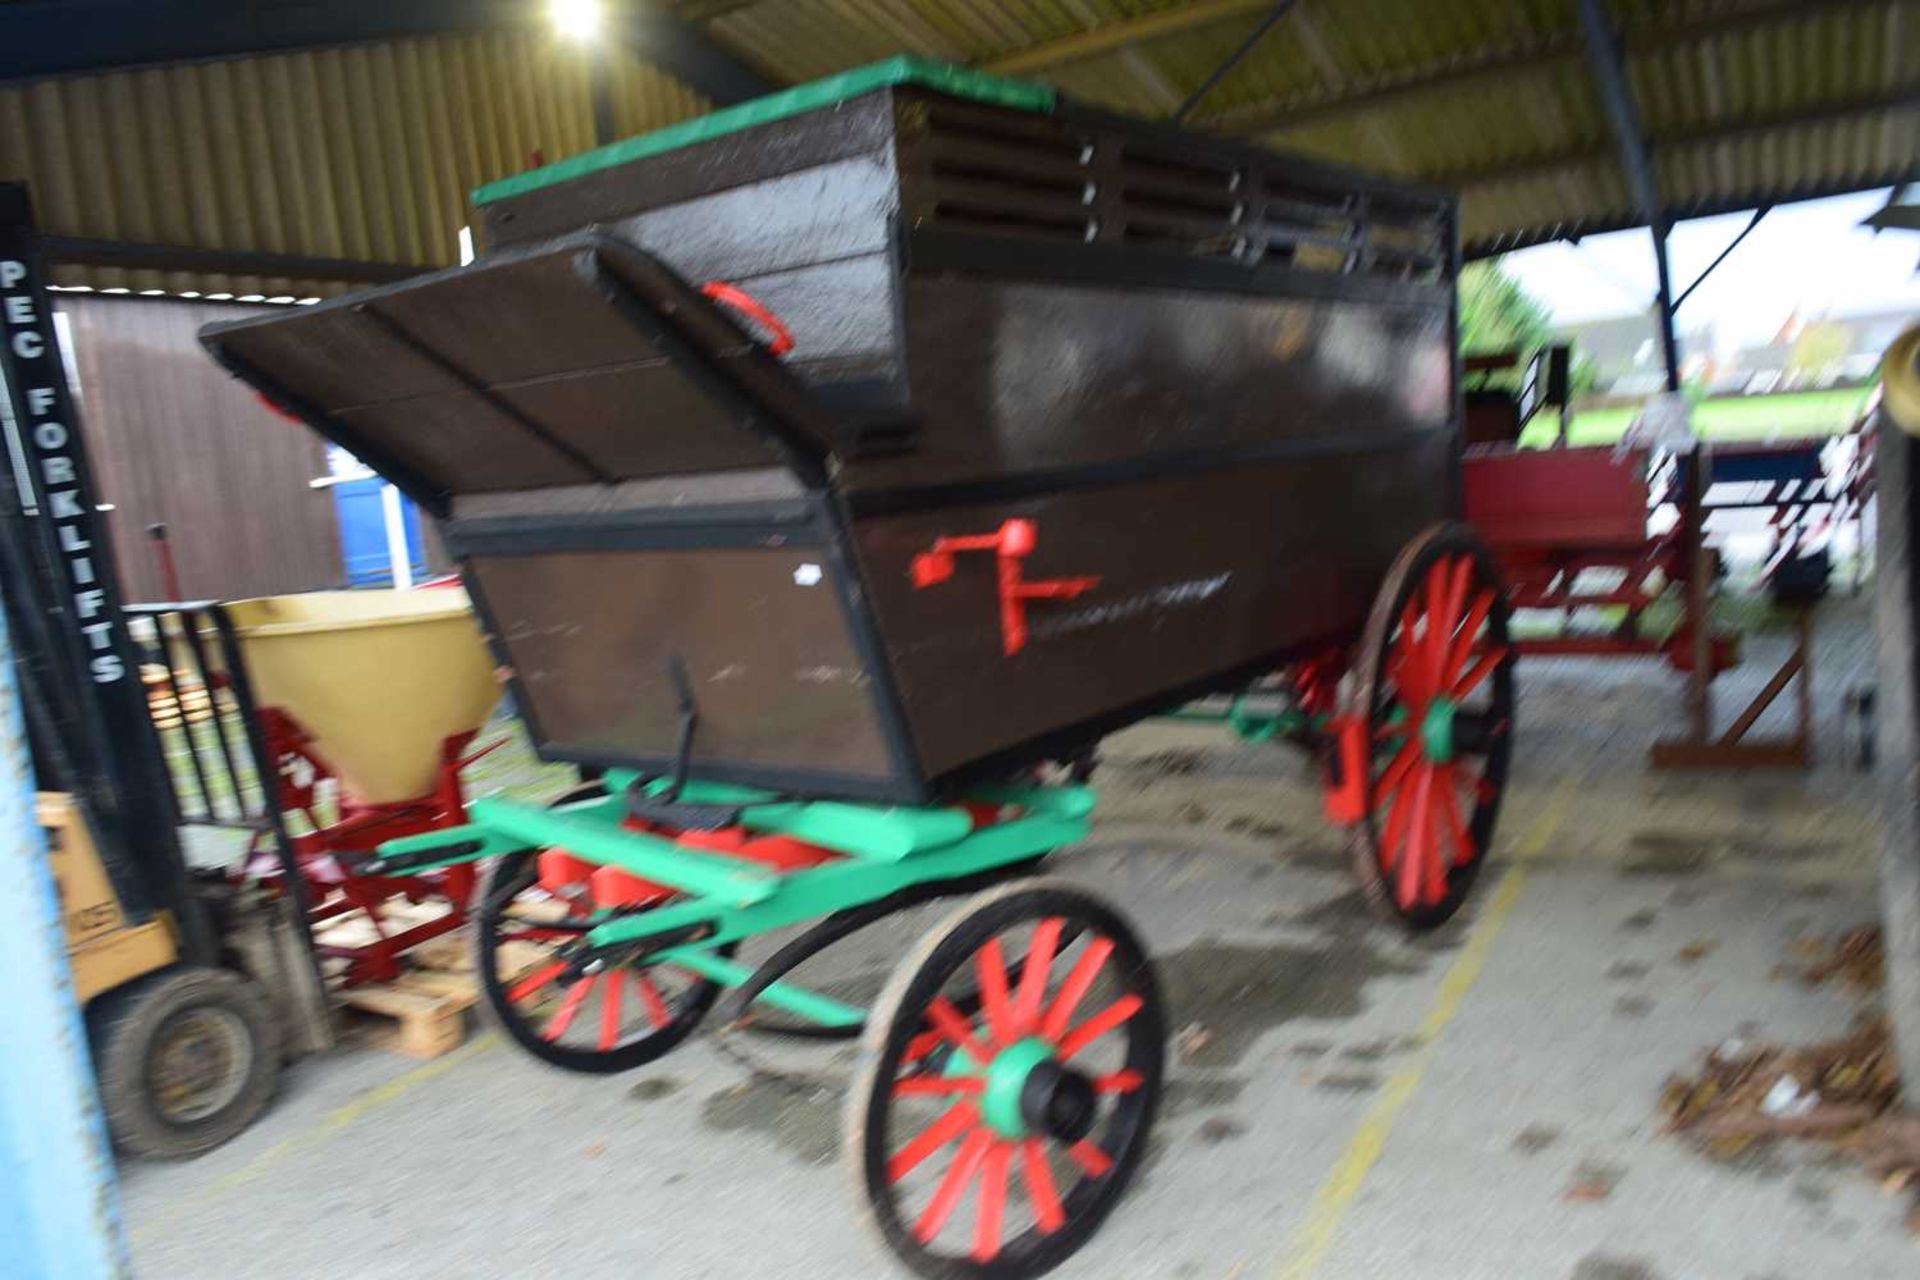 Double axle and wood panelled covered cart with ventilation to sides, for goods transport